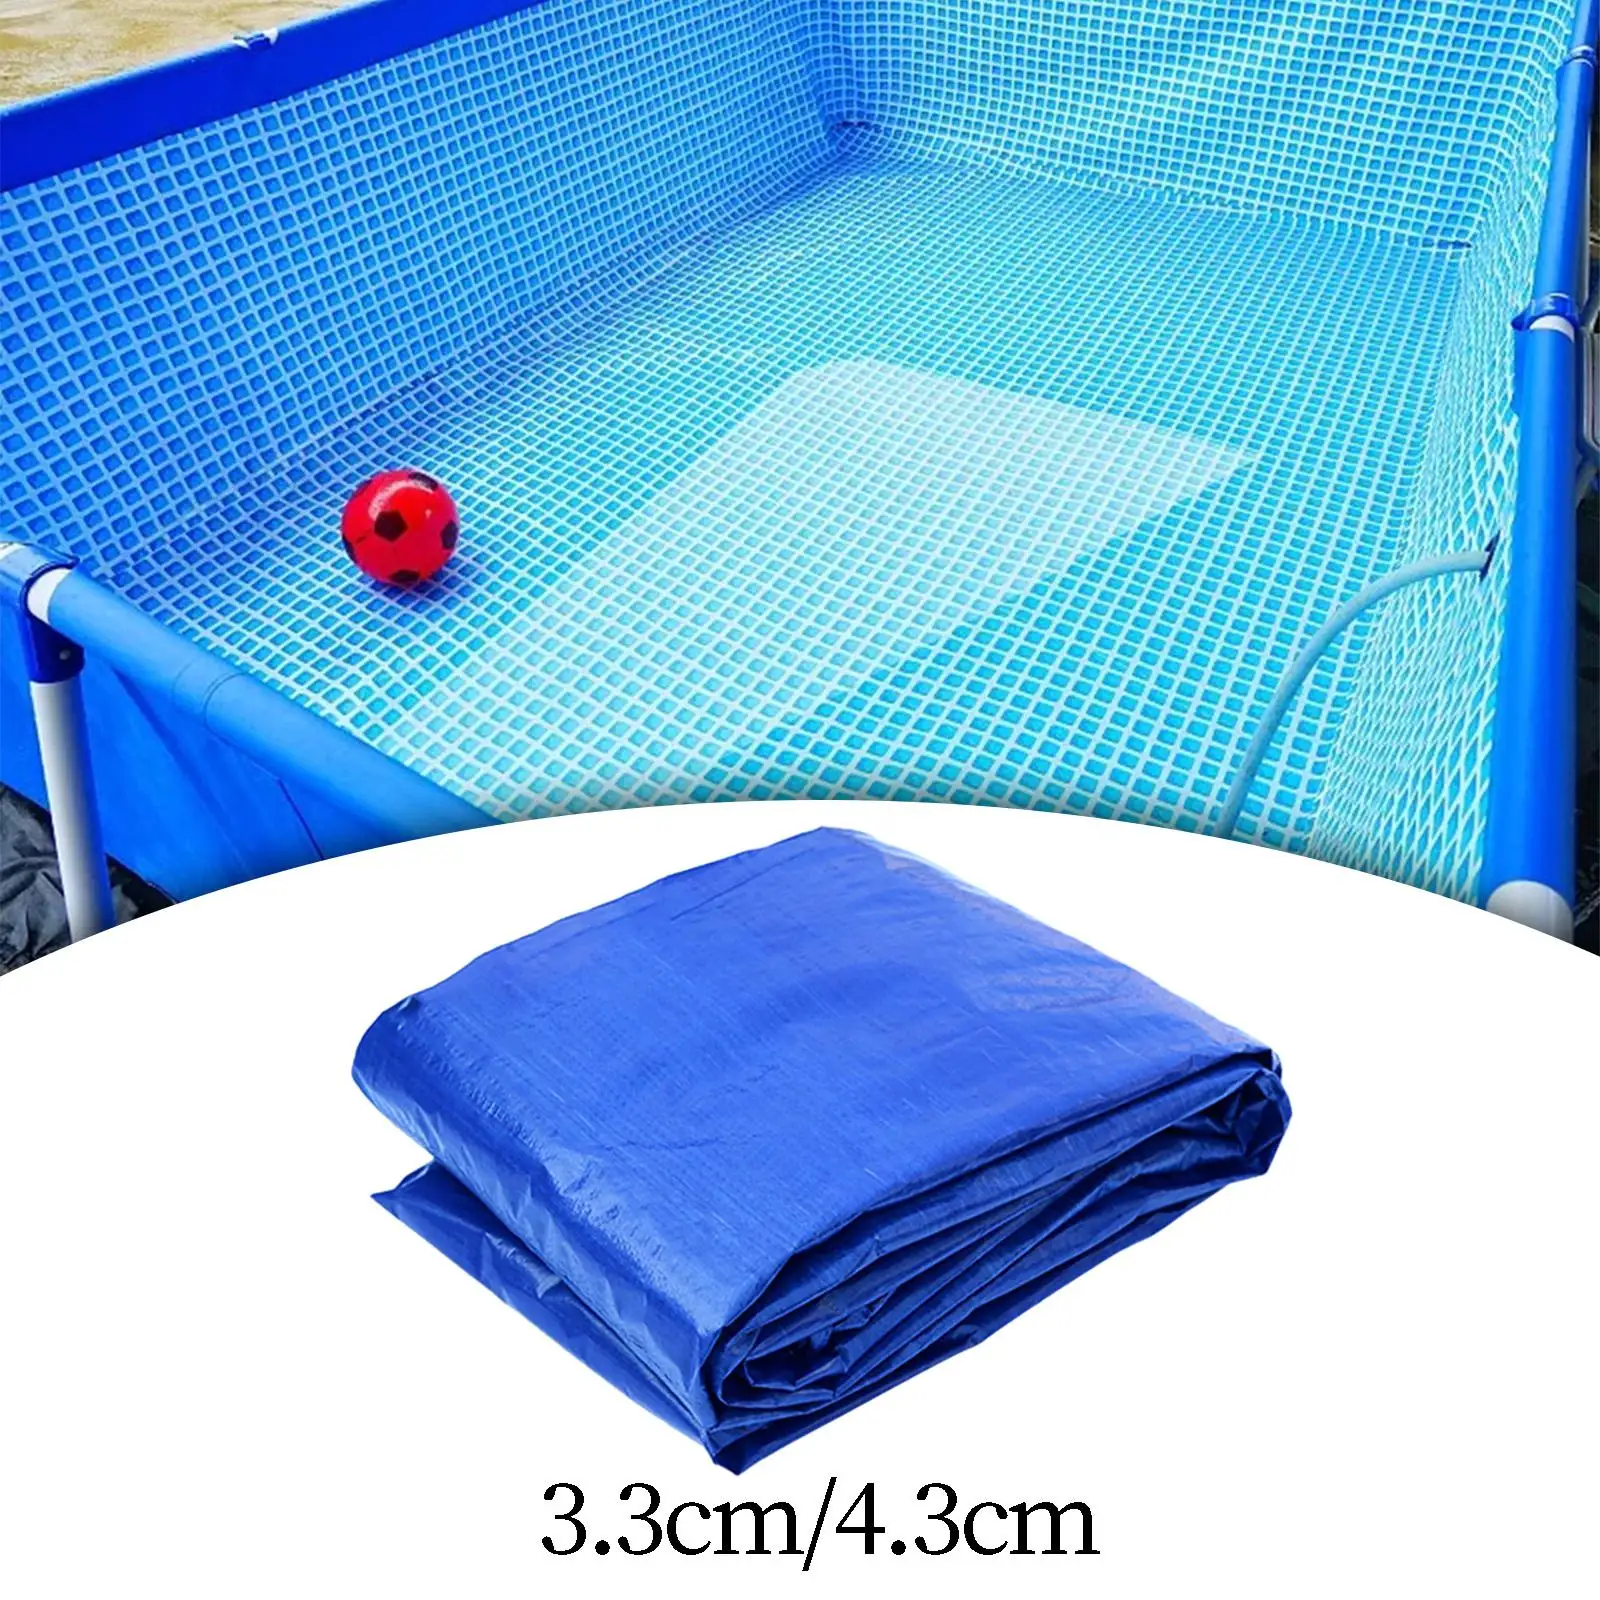 Swimming Pool Cover Protector/ Rectangular Durable Wear Resistant Sun Protection for above Ground Pool/ PE Material Pool Cover